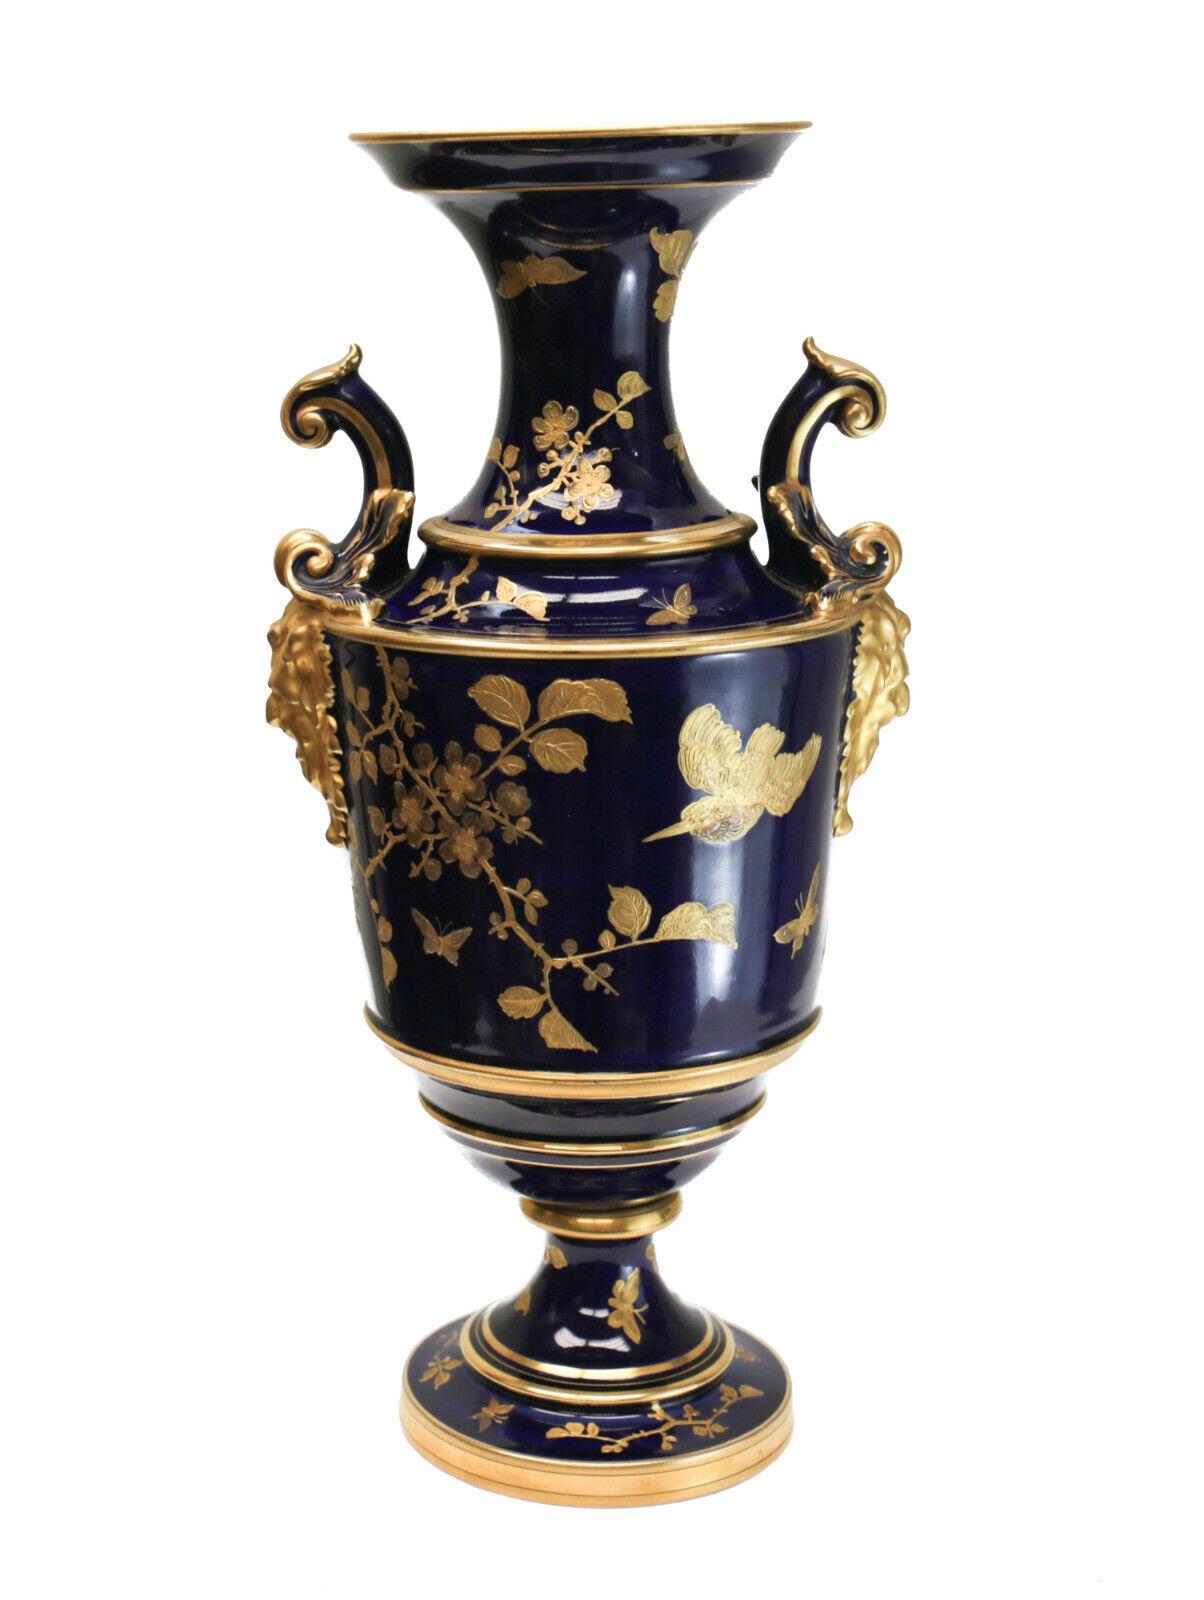 Pirkenhammer cobalt blue porcelain and gilt double handled footed vase, circa 1900

Beautiful gilt encrusted birds and florals throughout. Figural male heads to the sides of the handles. Pirkenhammer mark to the underside. 

Additional